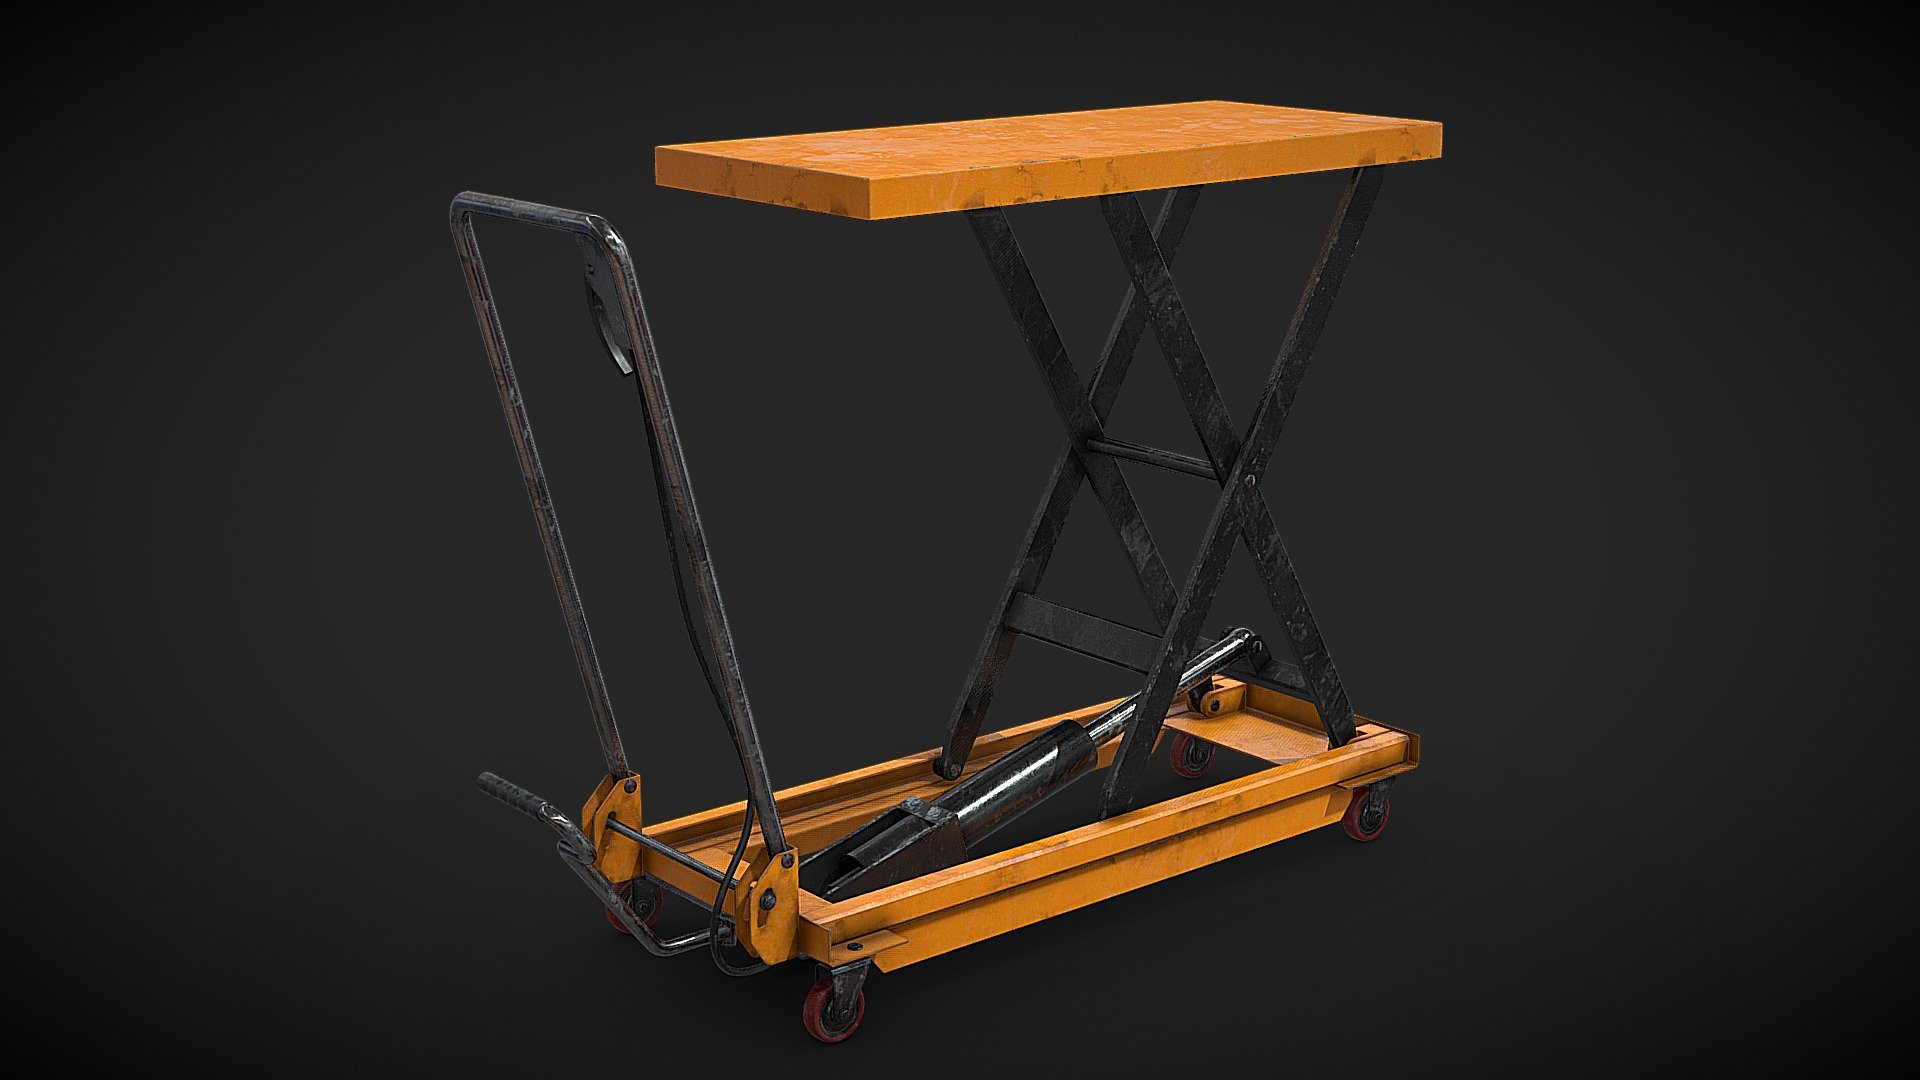 Orange-black manual scissor lift table.

Specification:




Model is in a real scale

Height: 128cm

Polygons: 50451

Verticles: 50309

Only Quads and Triangles used

Non-overlapping UV mapping

Formats:




3ds max 2017 V-Ray (native)

3ds max 2017 Arnold

Cinema R20

Cinema R20 V-Ray

Blender Cycles

UnrealEngine 5.1

Unity 2020

FBX

OBJ

DWG
 - Scissor Lift Table II - Buy Royalty Free 3D model by Fusemesh 3d model